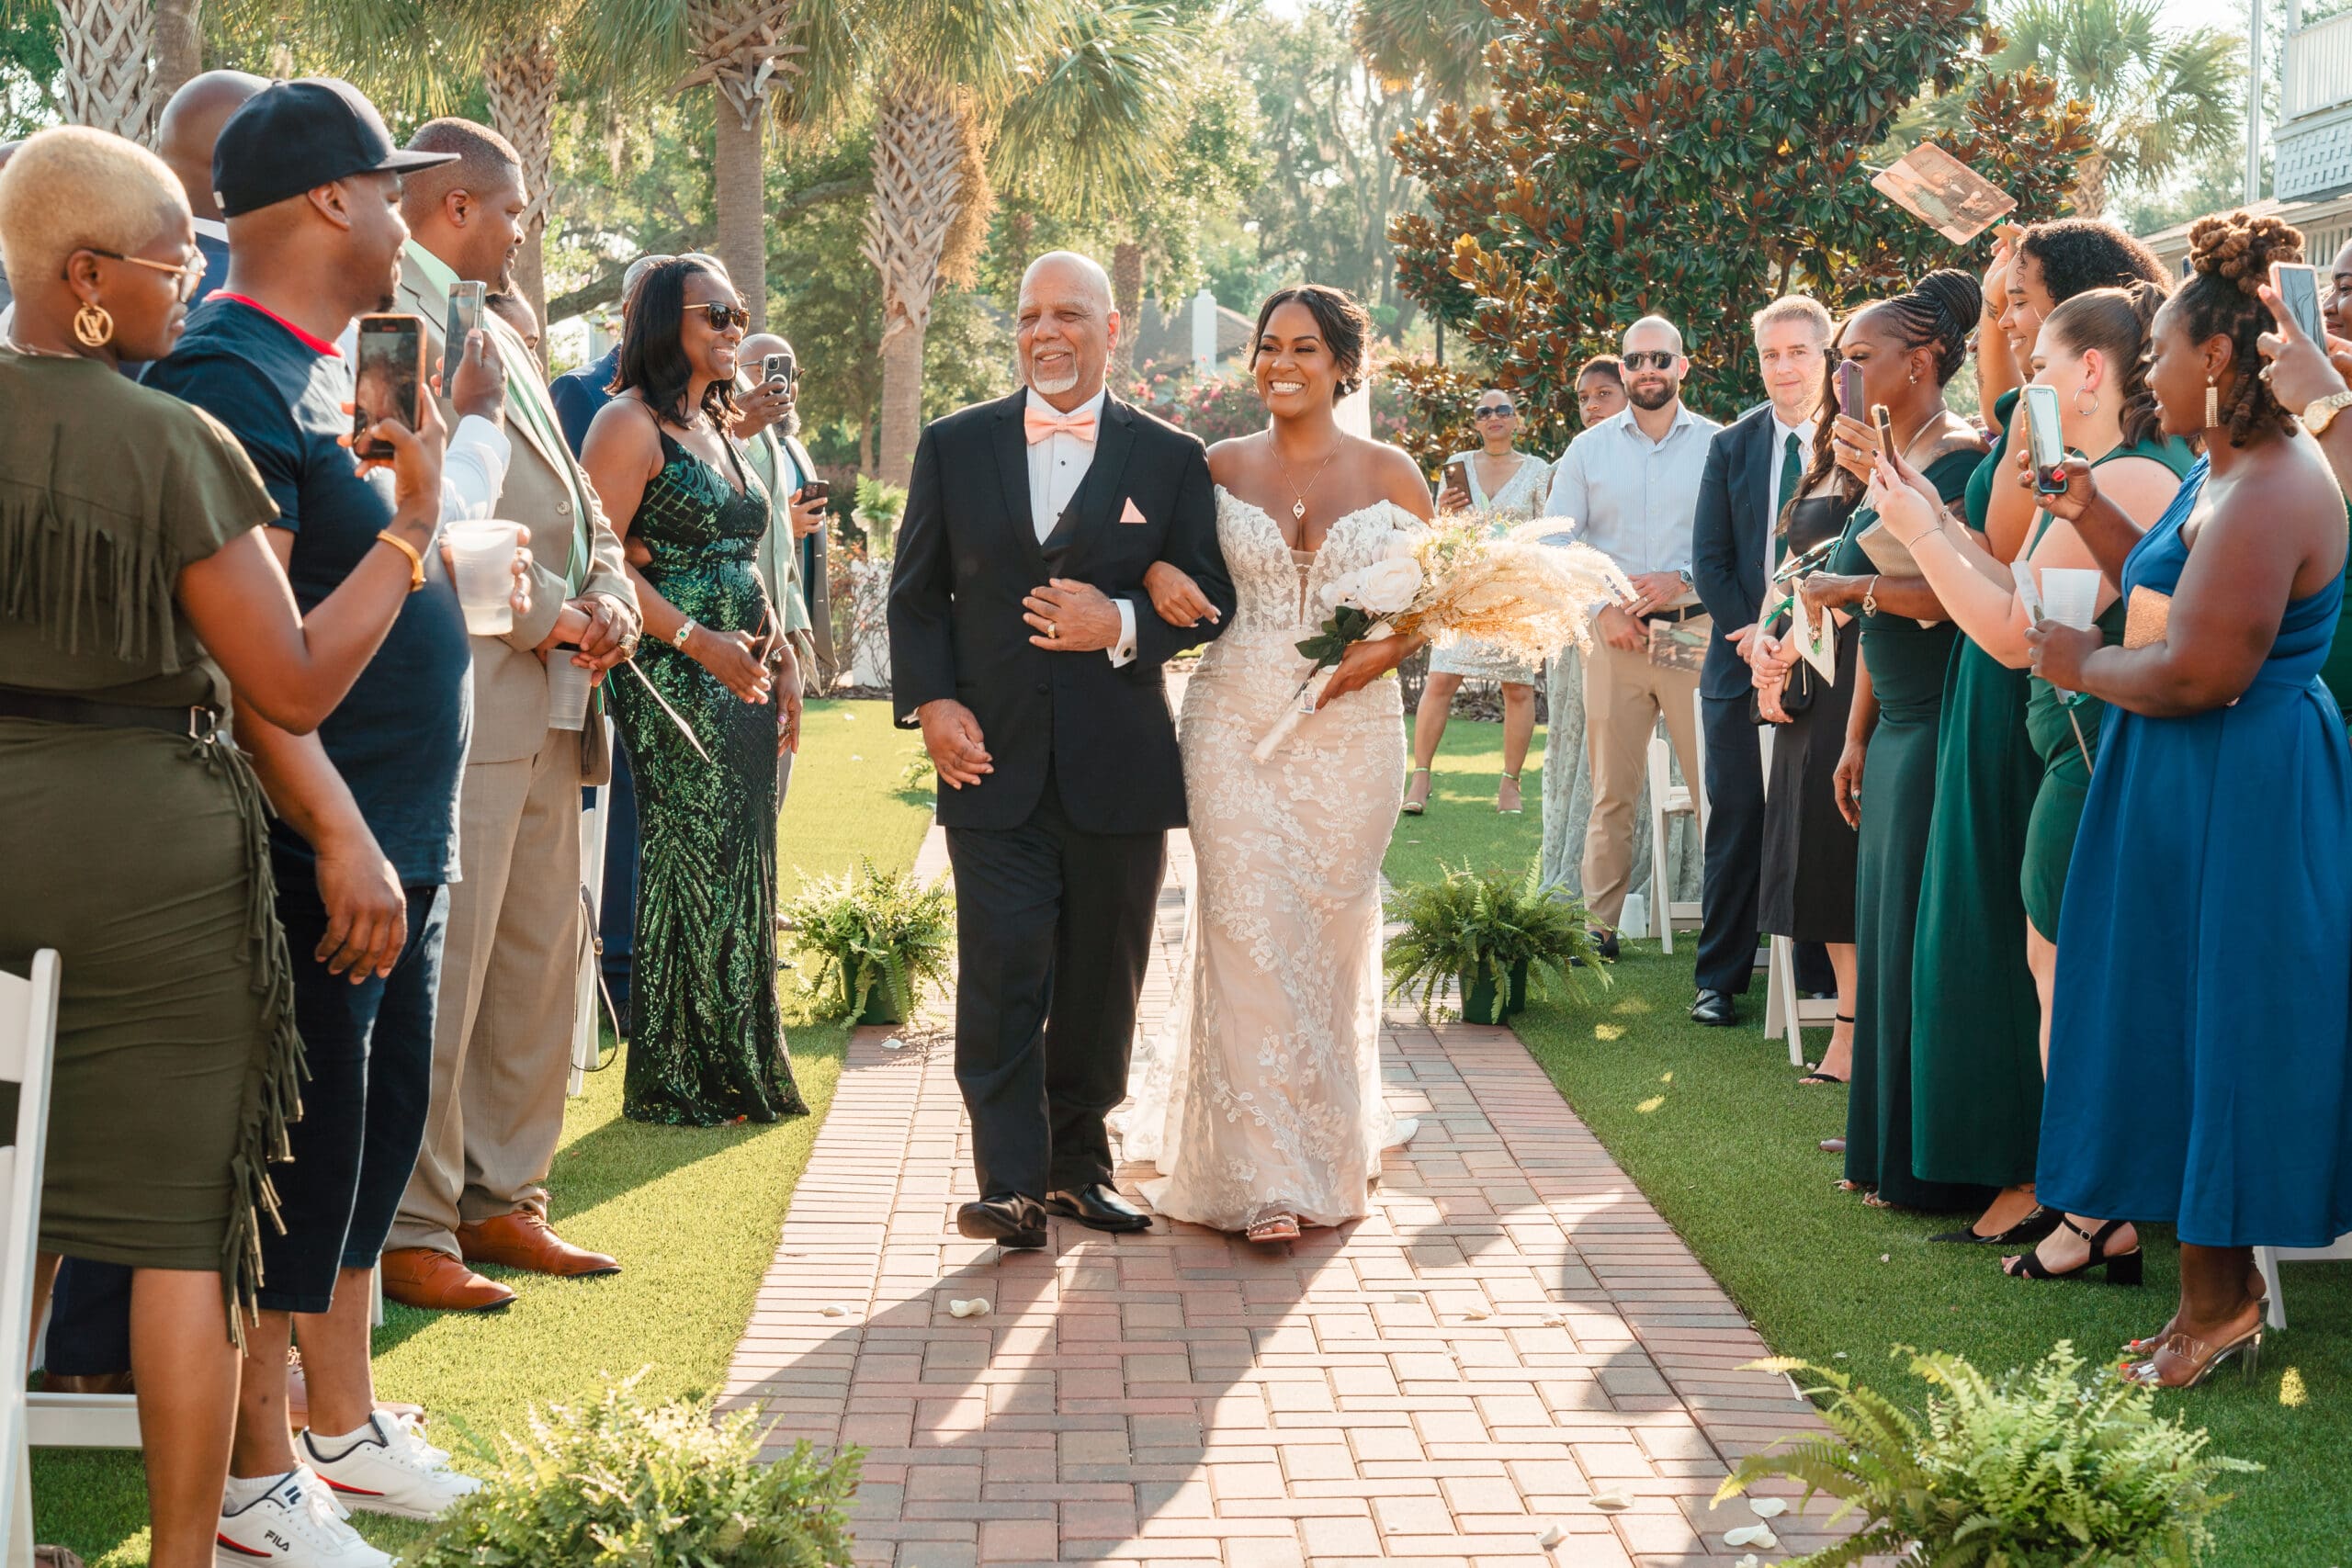 Lateisha and her father walking down the aisle towards the altar, surrounded by smiling guests taking pictures.